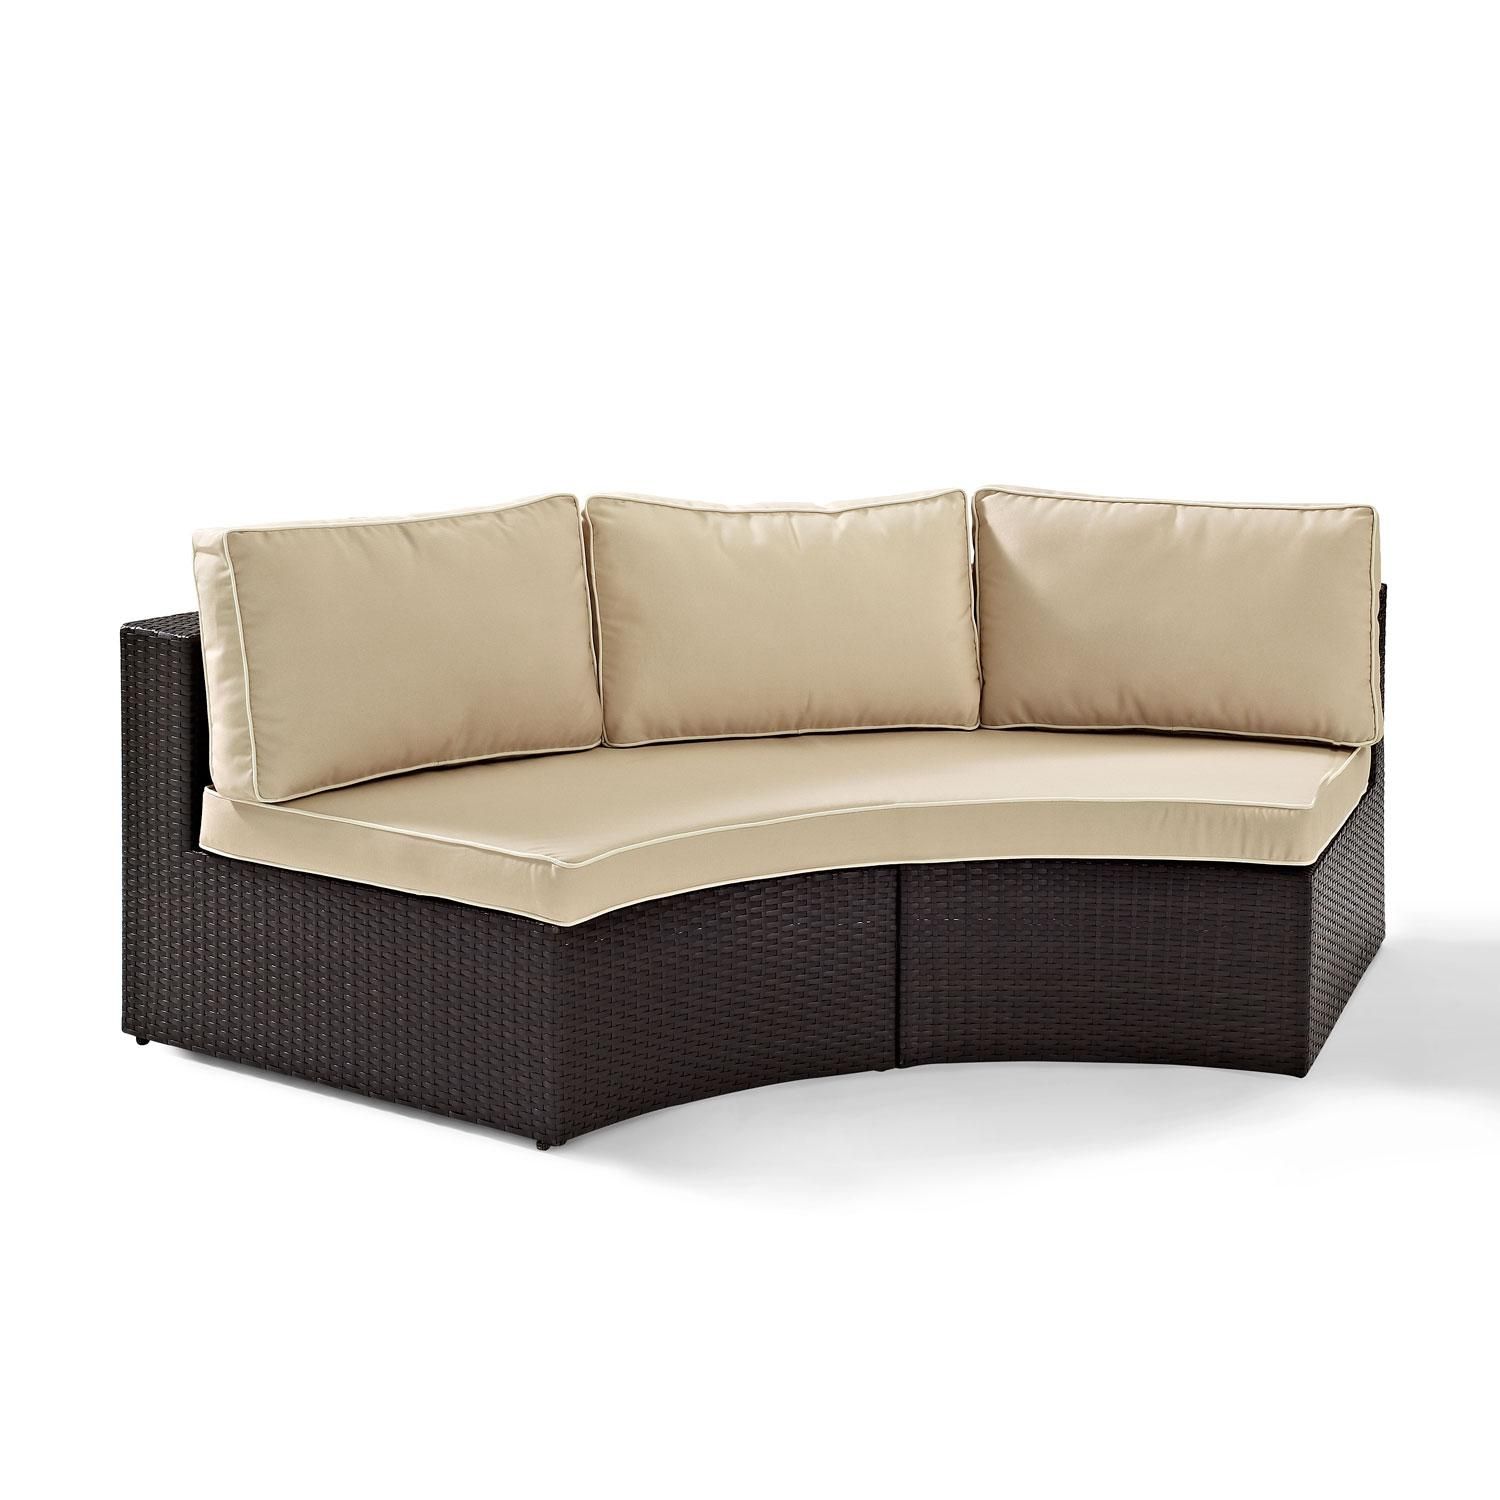 Catalina Outdoor Wicker Round Sectional Sofa With Sand Cushions Pertaining To Round Sectional Sofa (View 19 of 20)